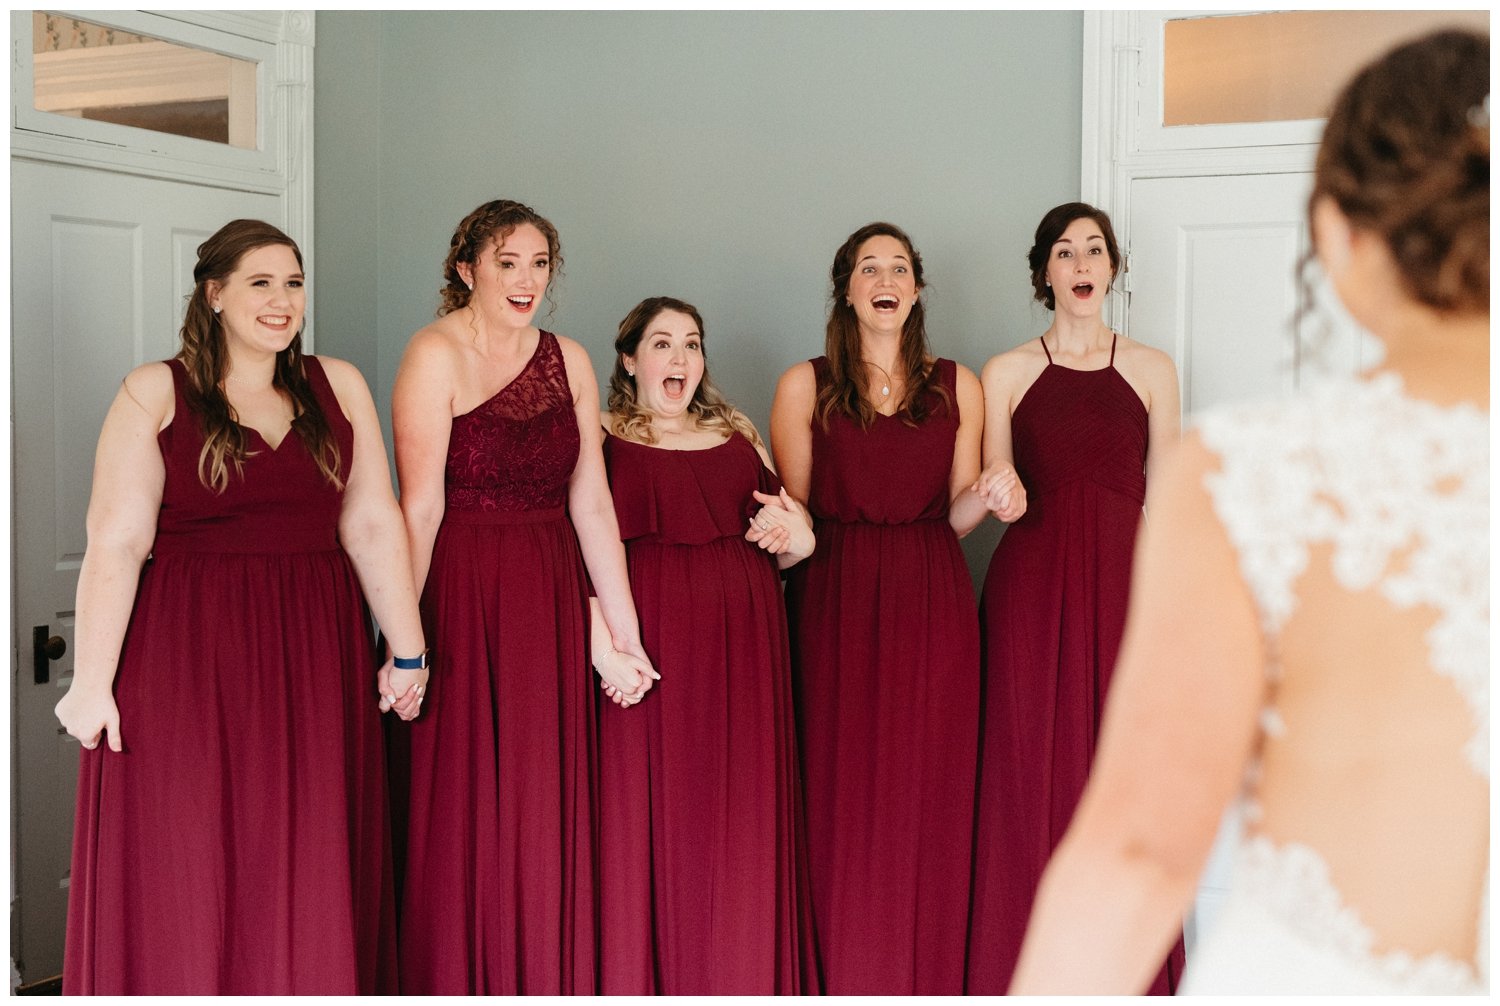 The bridesmaids react to the bride in her full wedding wear for the intimate destination wedding